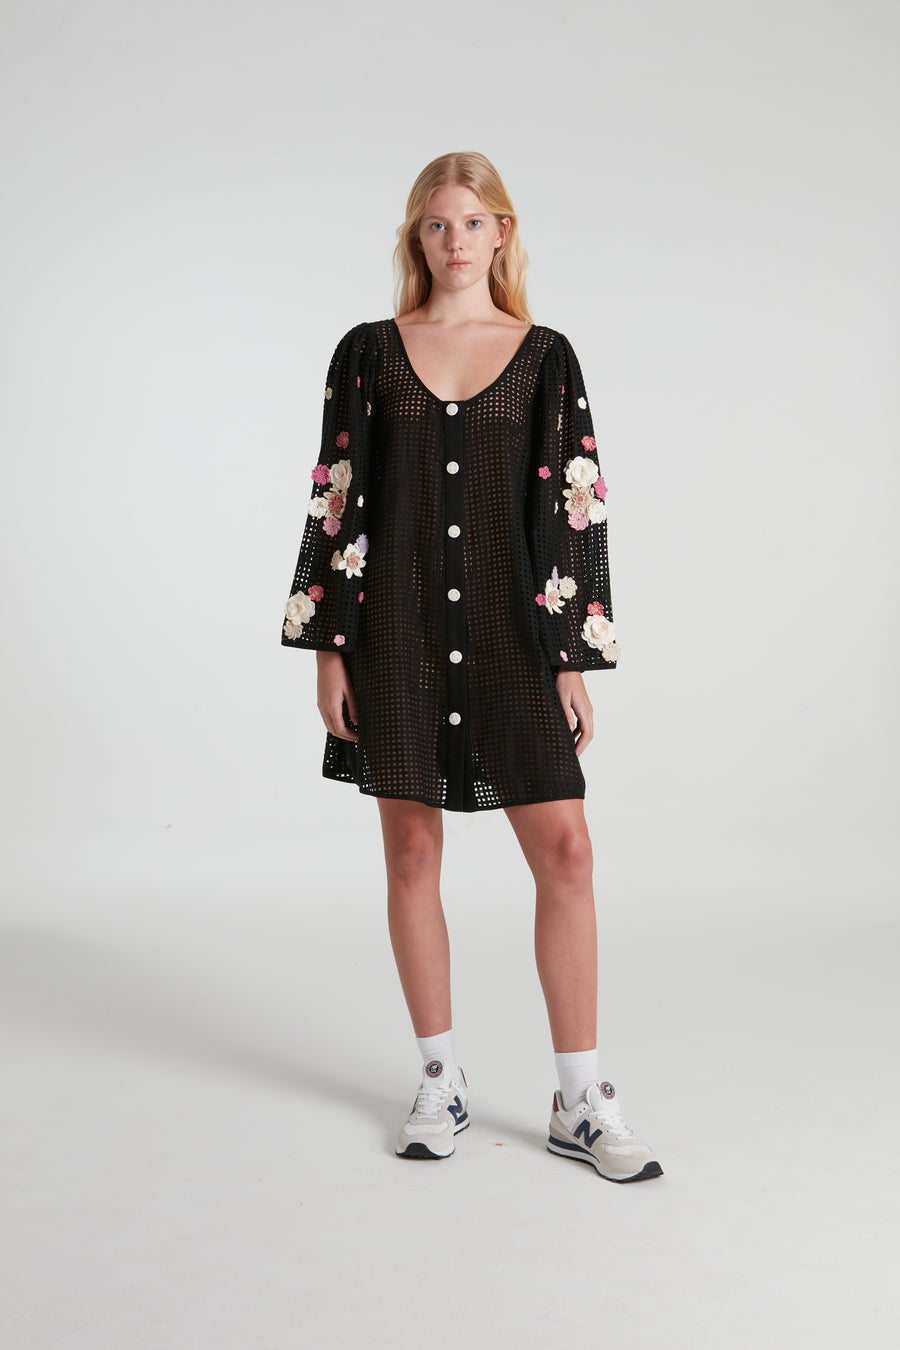 Black stenciled short dress decorated with knitted flowers